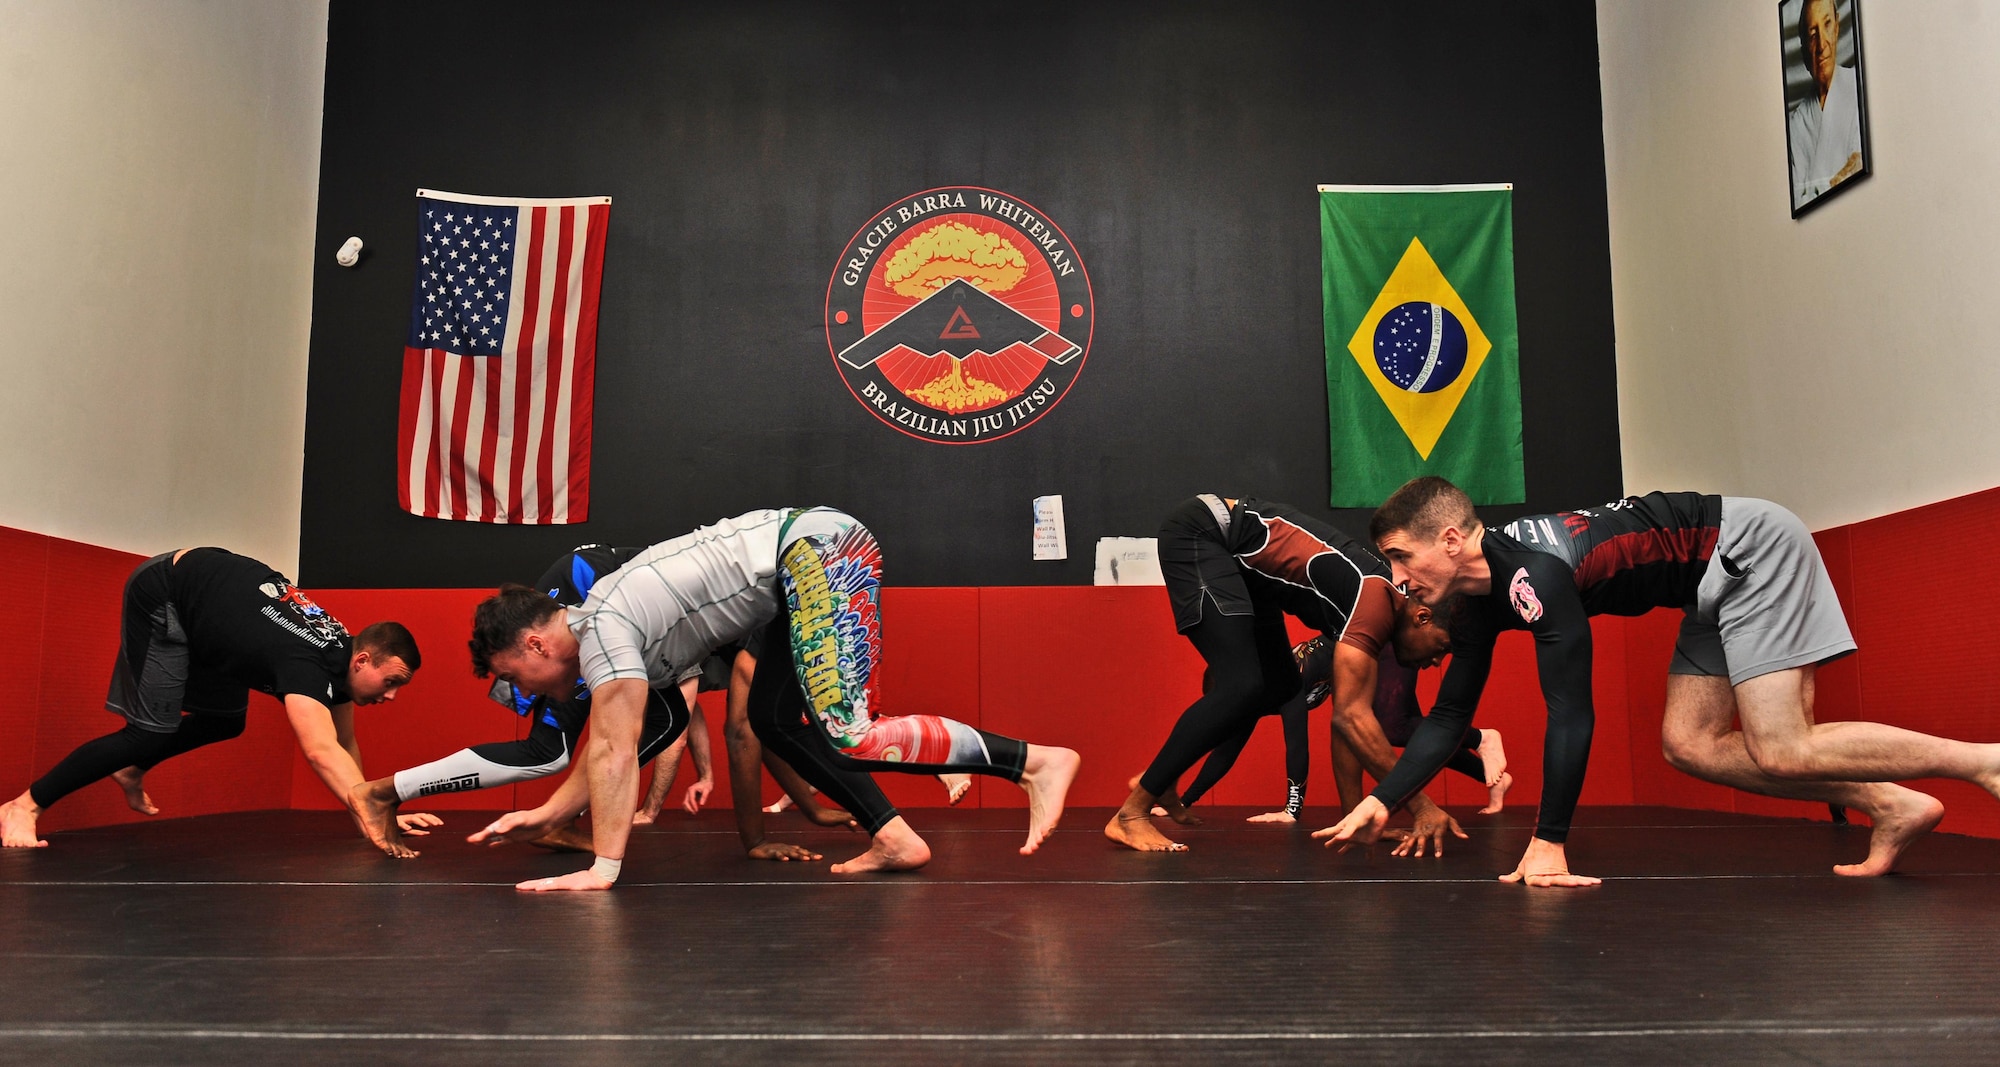 Students warm up during a Jiu Jitsu class by performing bear crawls at the fitness center on Whiteman Air Force Base, Mo., Feb. 3, 2017. Brazilian Jiu Jitsu, a ground based martial art, teaches practitioners to fight from their backs. Adult and youth classes are offered weekly at the Whiteman fitness center. (U.S. Air Force photo by Tech. Sgt. Miguel Lara)